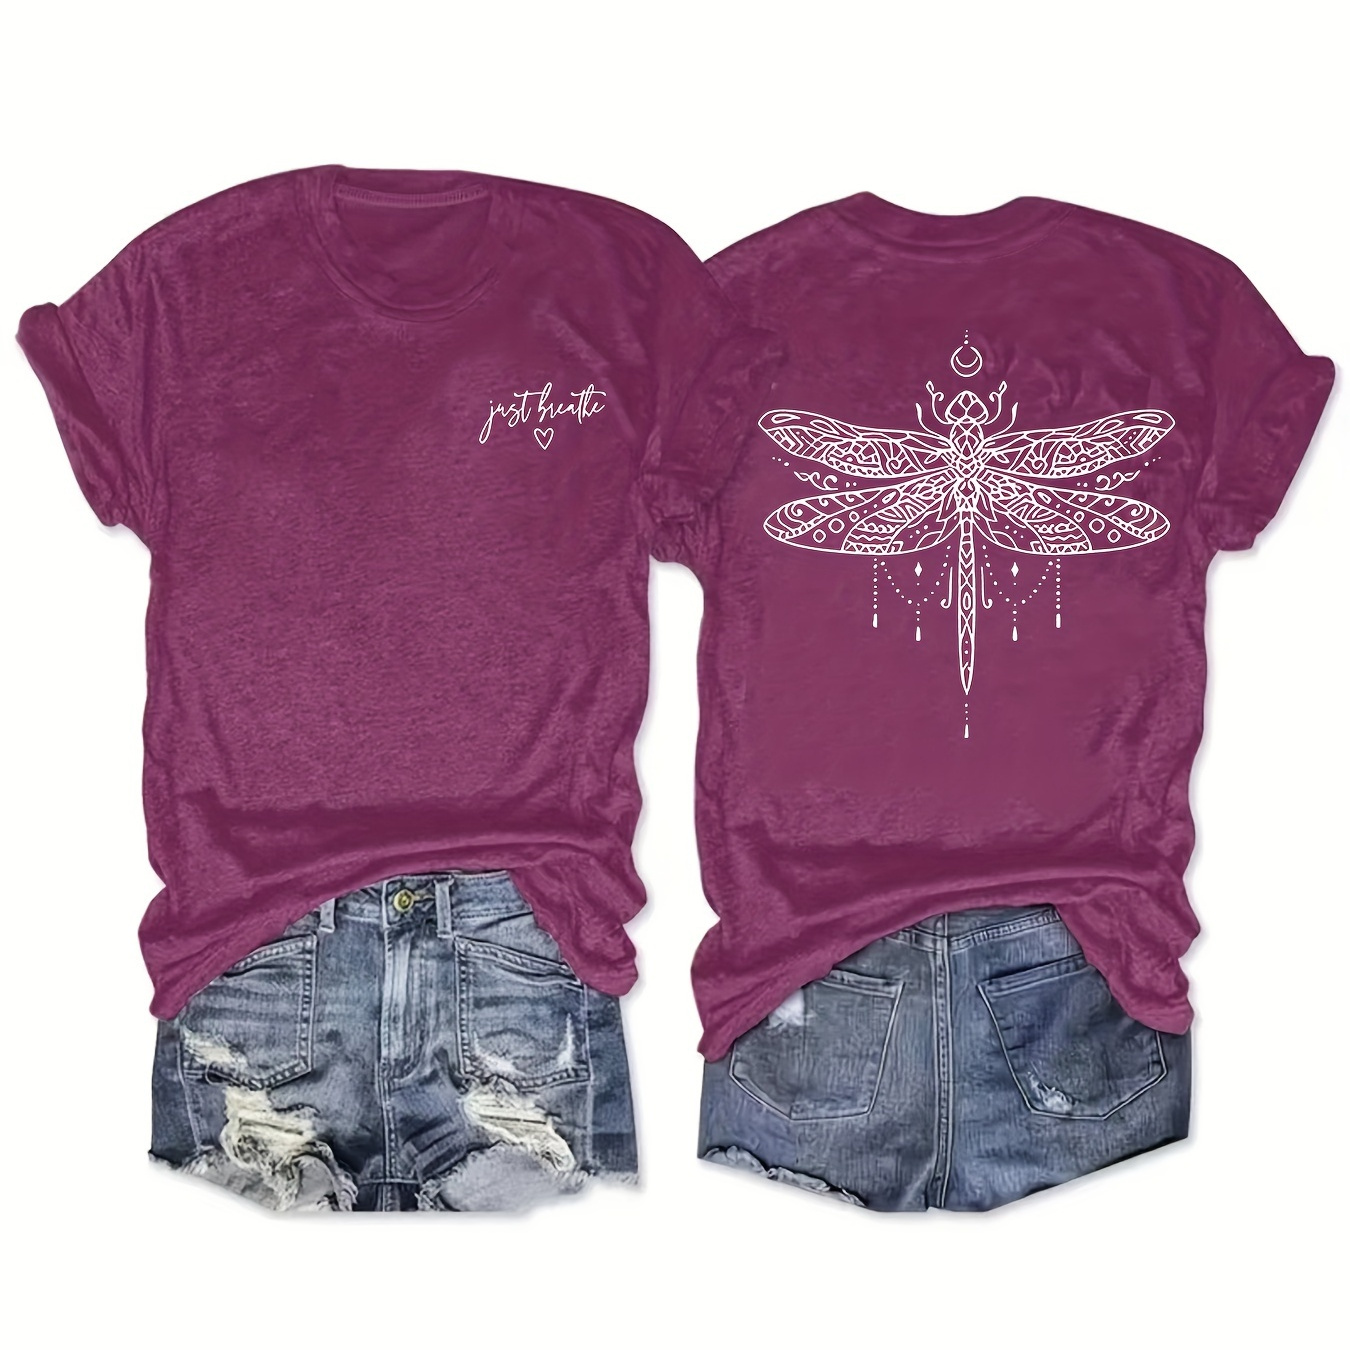 

Dragonfly & Heart Print T-shirt, Short Sleeve Crew Neck Casual Top For Summer & Spring, Women's Clothing